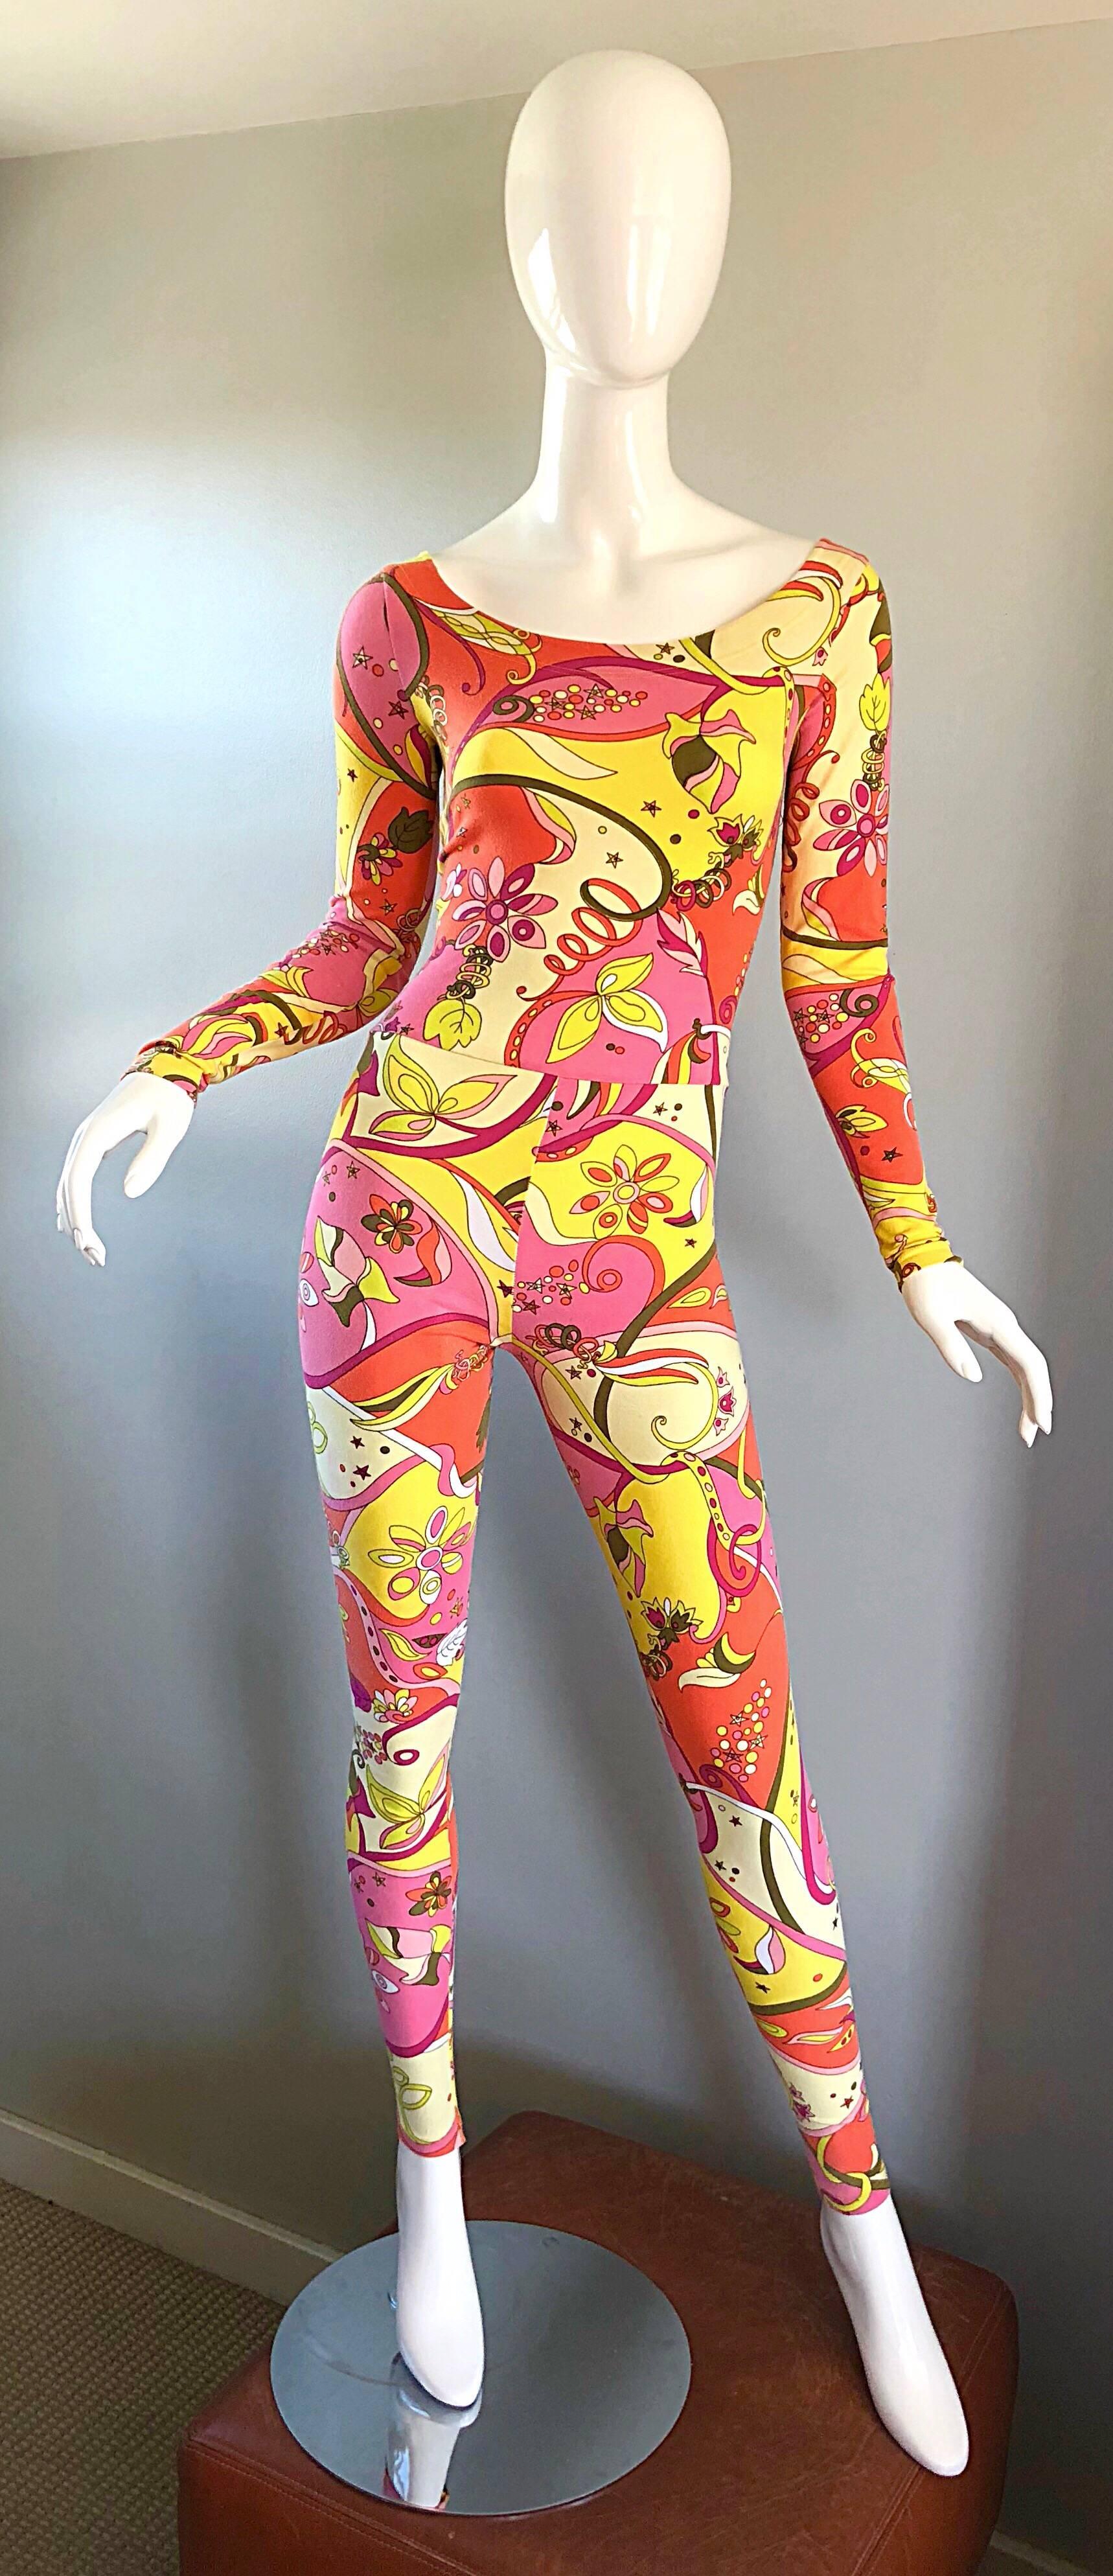 Amazing rare musuem quality early 80s BETSEY JOHNSON punk label physchedelic onesie cat suit! Features vibrant colors of pink, yellow and orange in awesome psychedelic prints. Stretch cotton is super soft and stretches to fit. Great belted or alone.